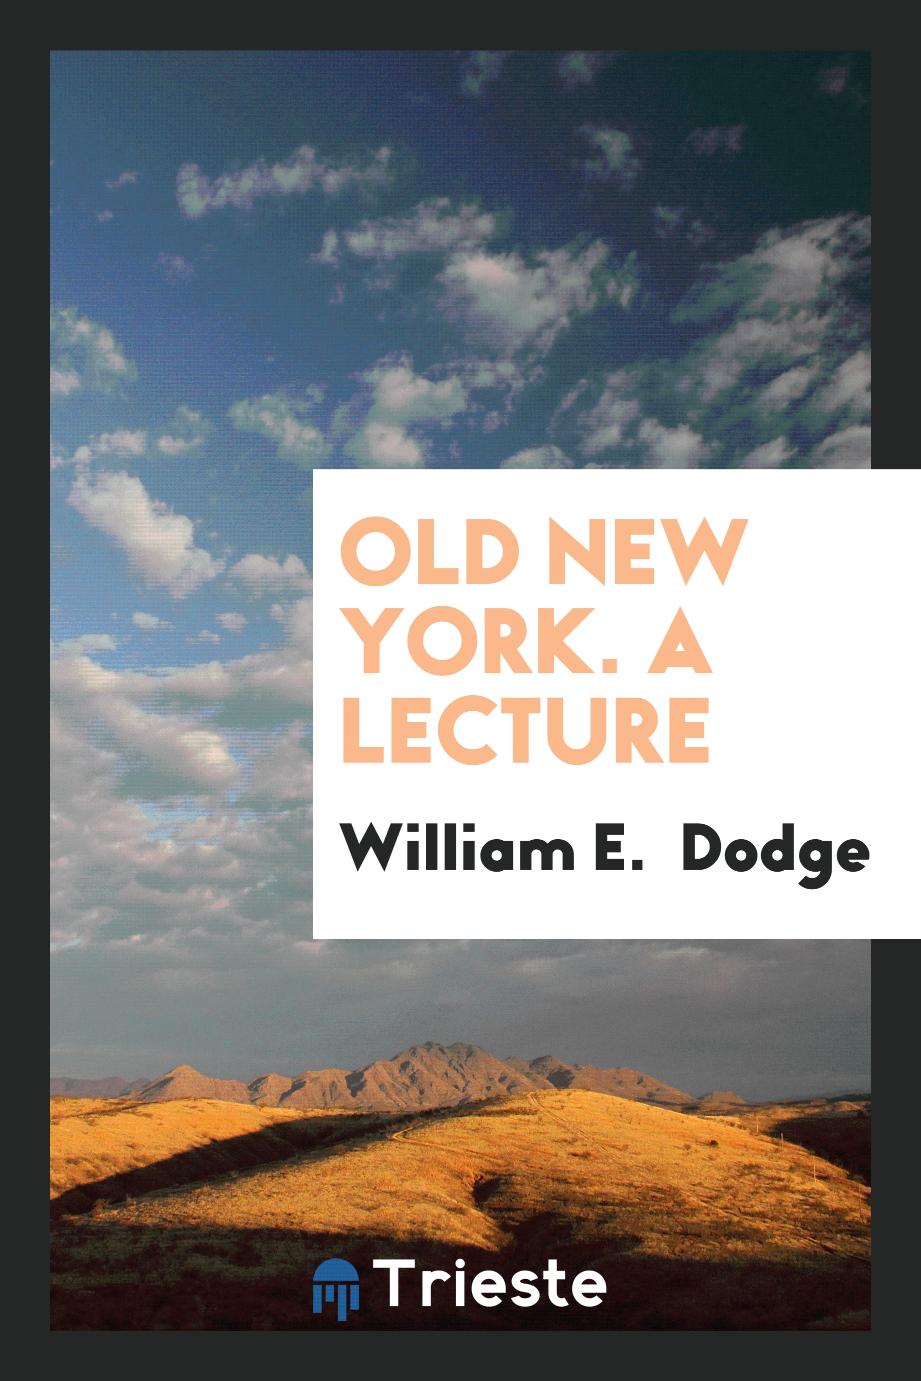 Old New York. A Lecture